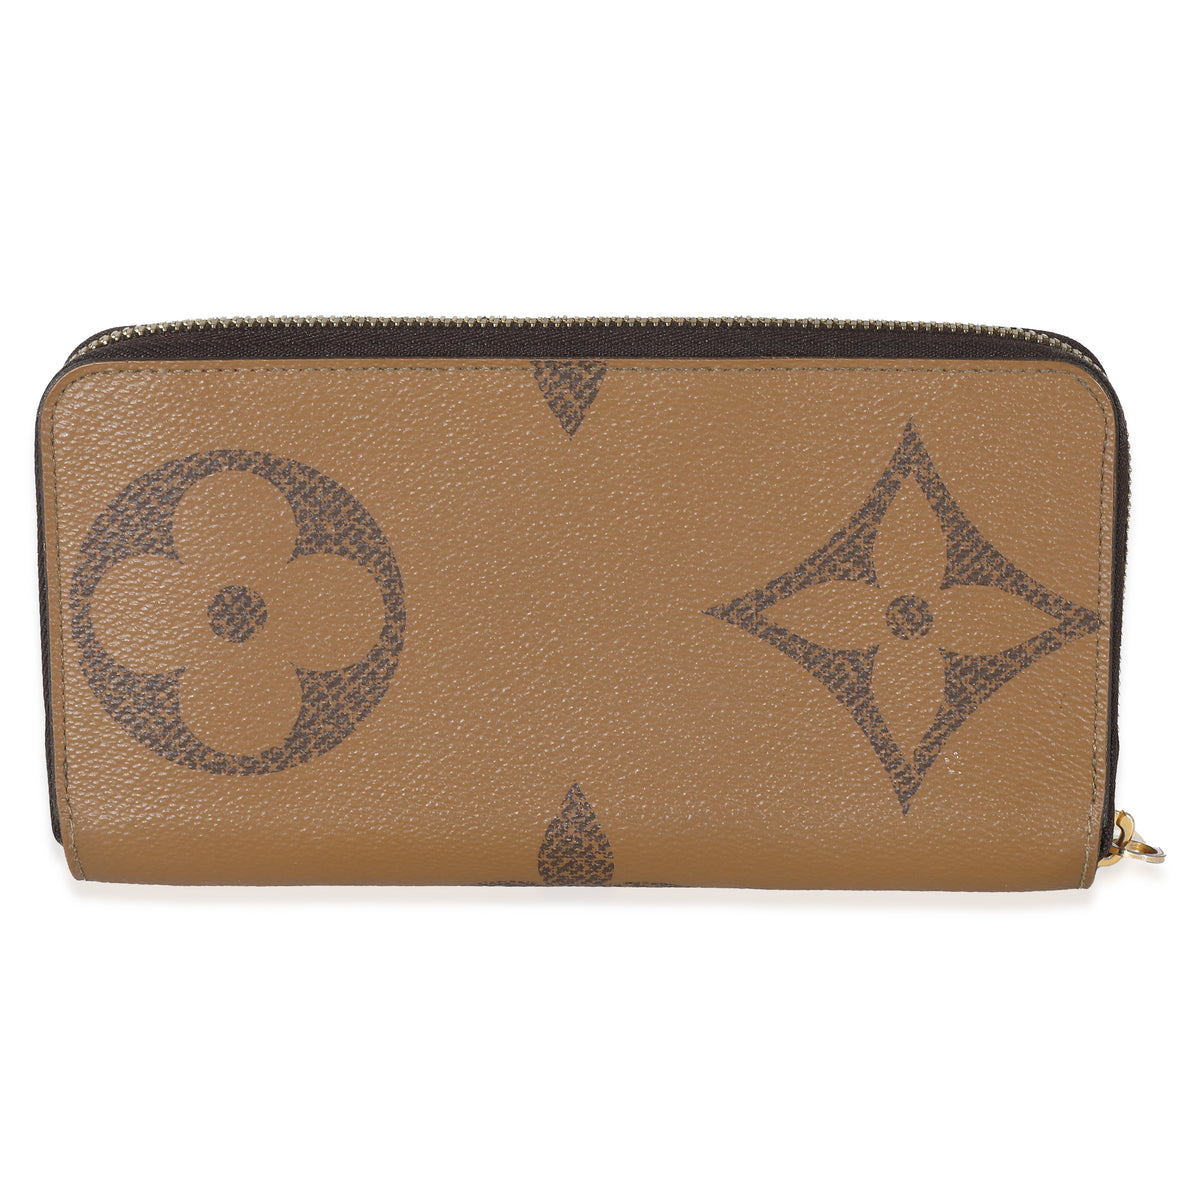 Zippy Wallet Monogram Reverse Canvas - Wallets and Small Leather